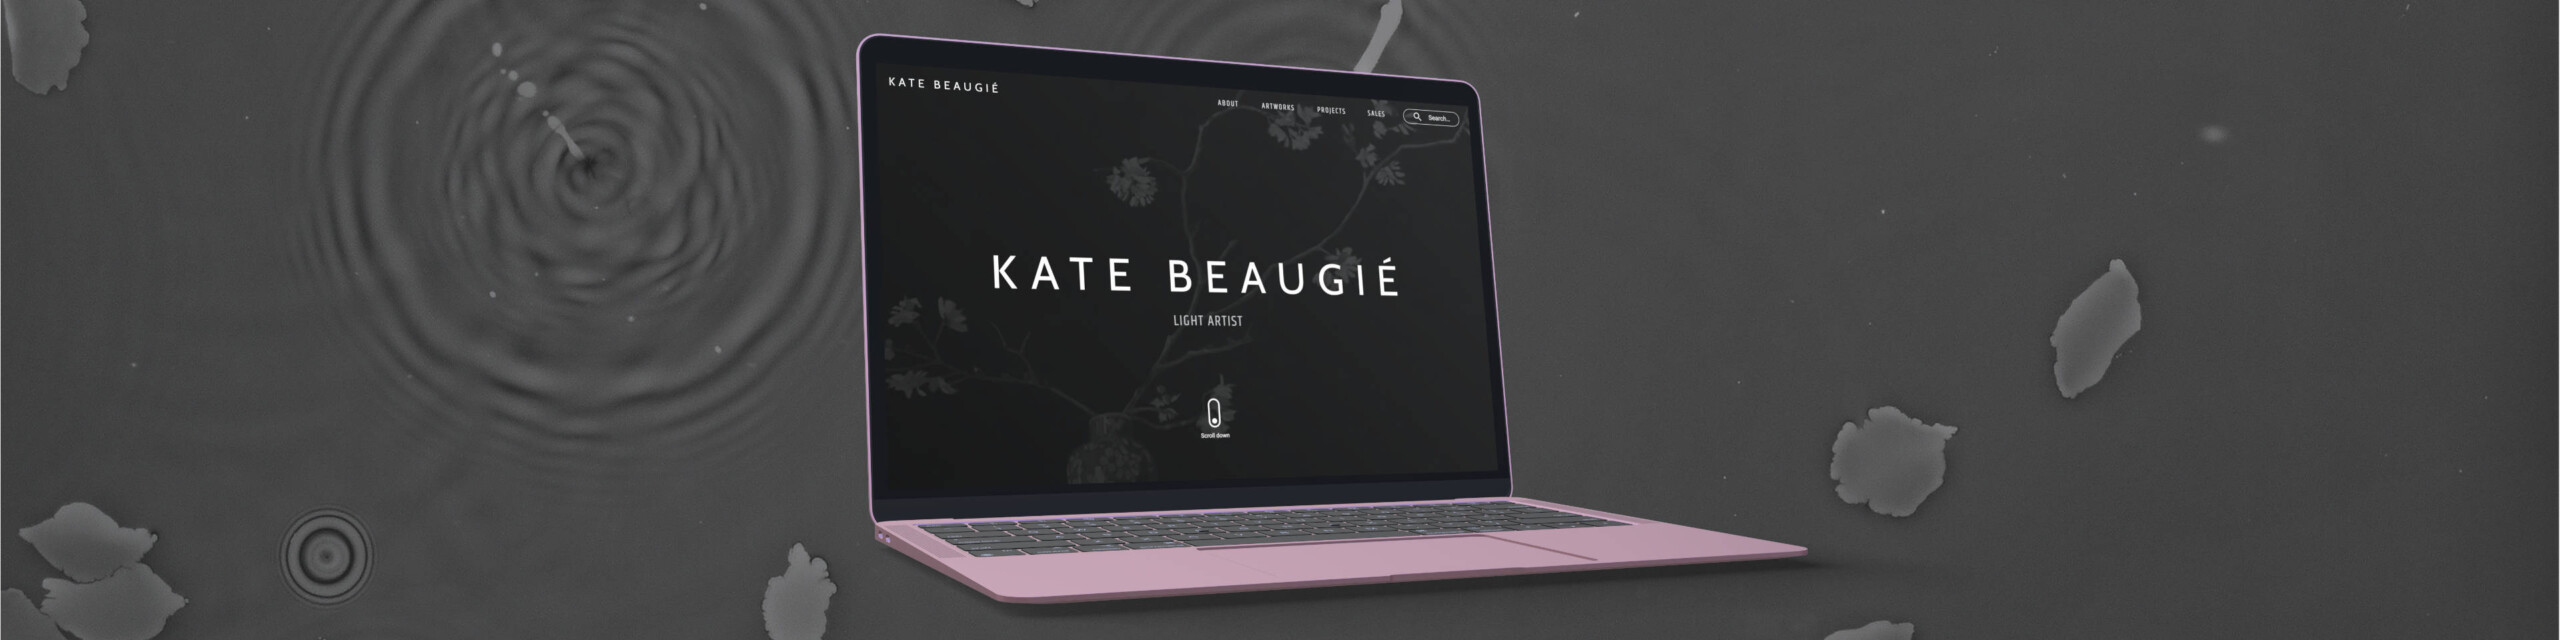 Montage image showing Kate Beaugié's website displayed on a laptop screen against a dark back drop of a photogram with leaves on water